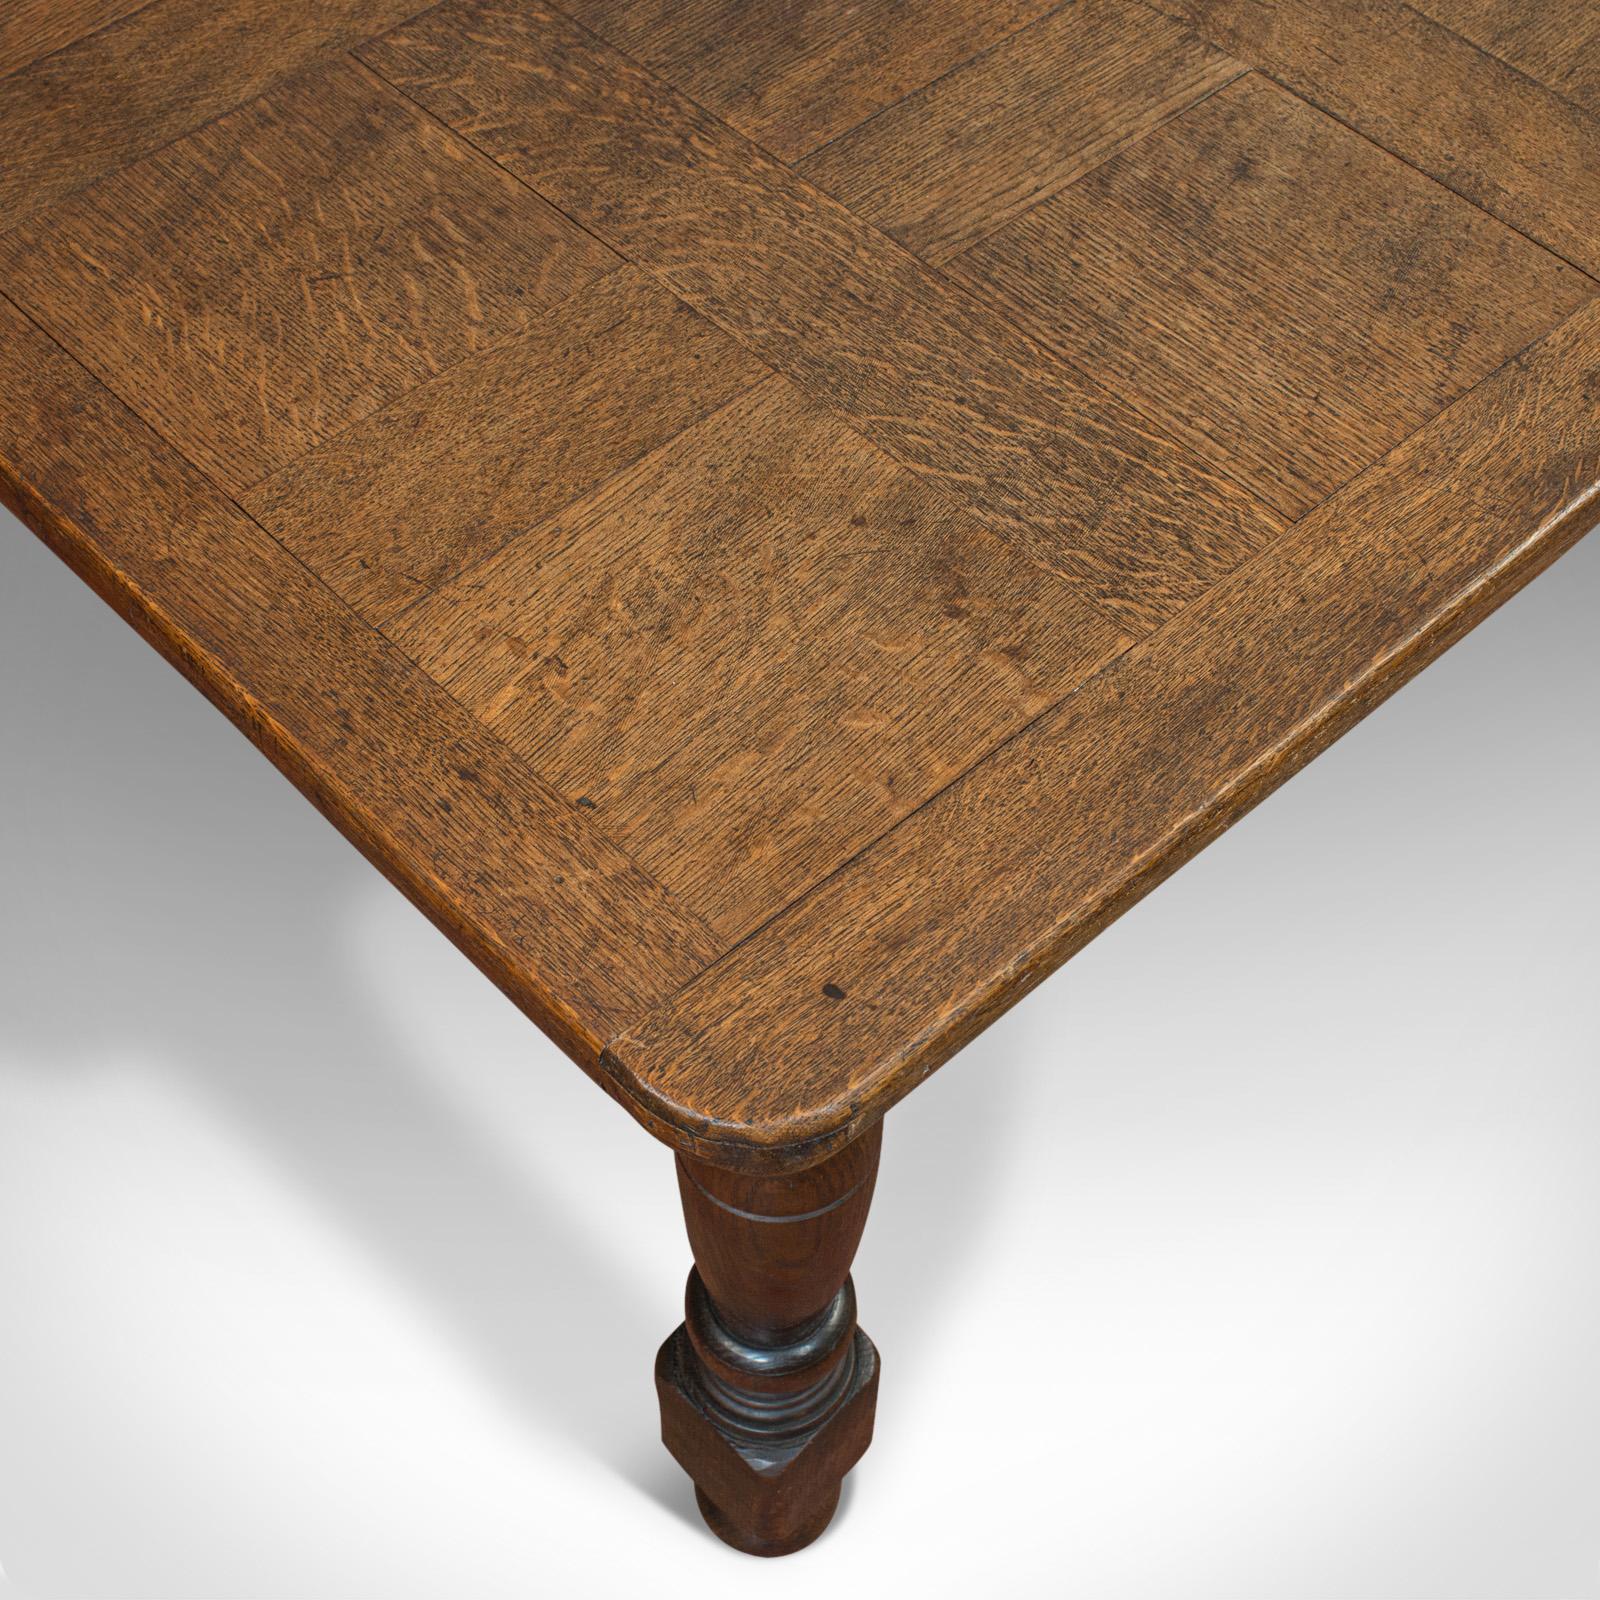 20th Century Antique Dining Table, English, Oak, 6 Seat, Country House, Victorian, 1900